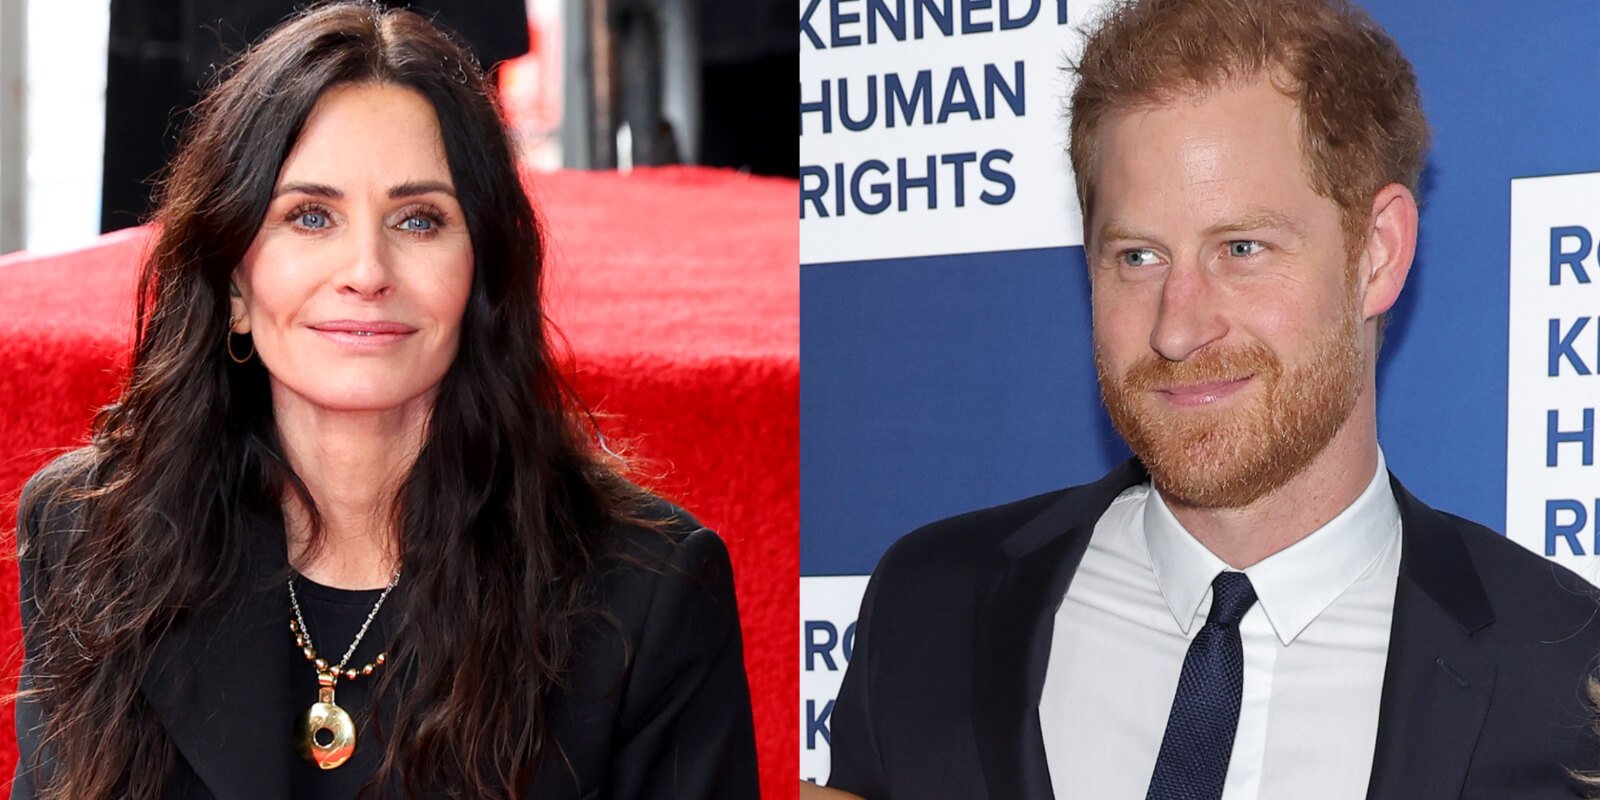 Courteney Cox and Prince Harry in side by side photographs.